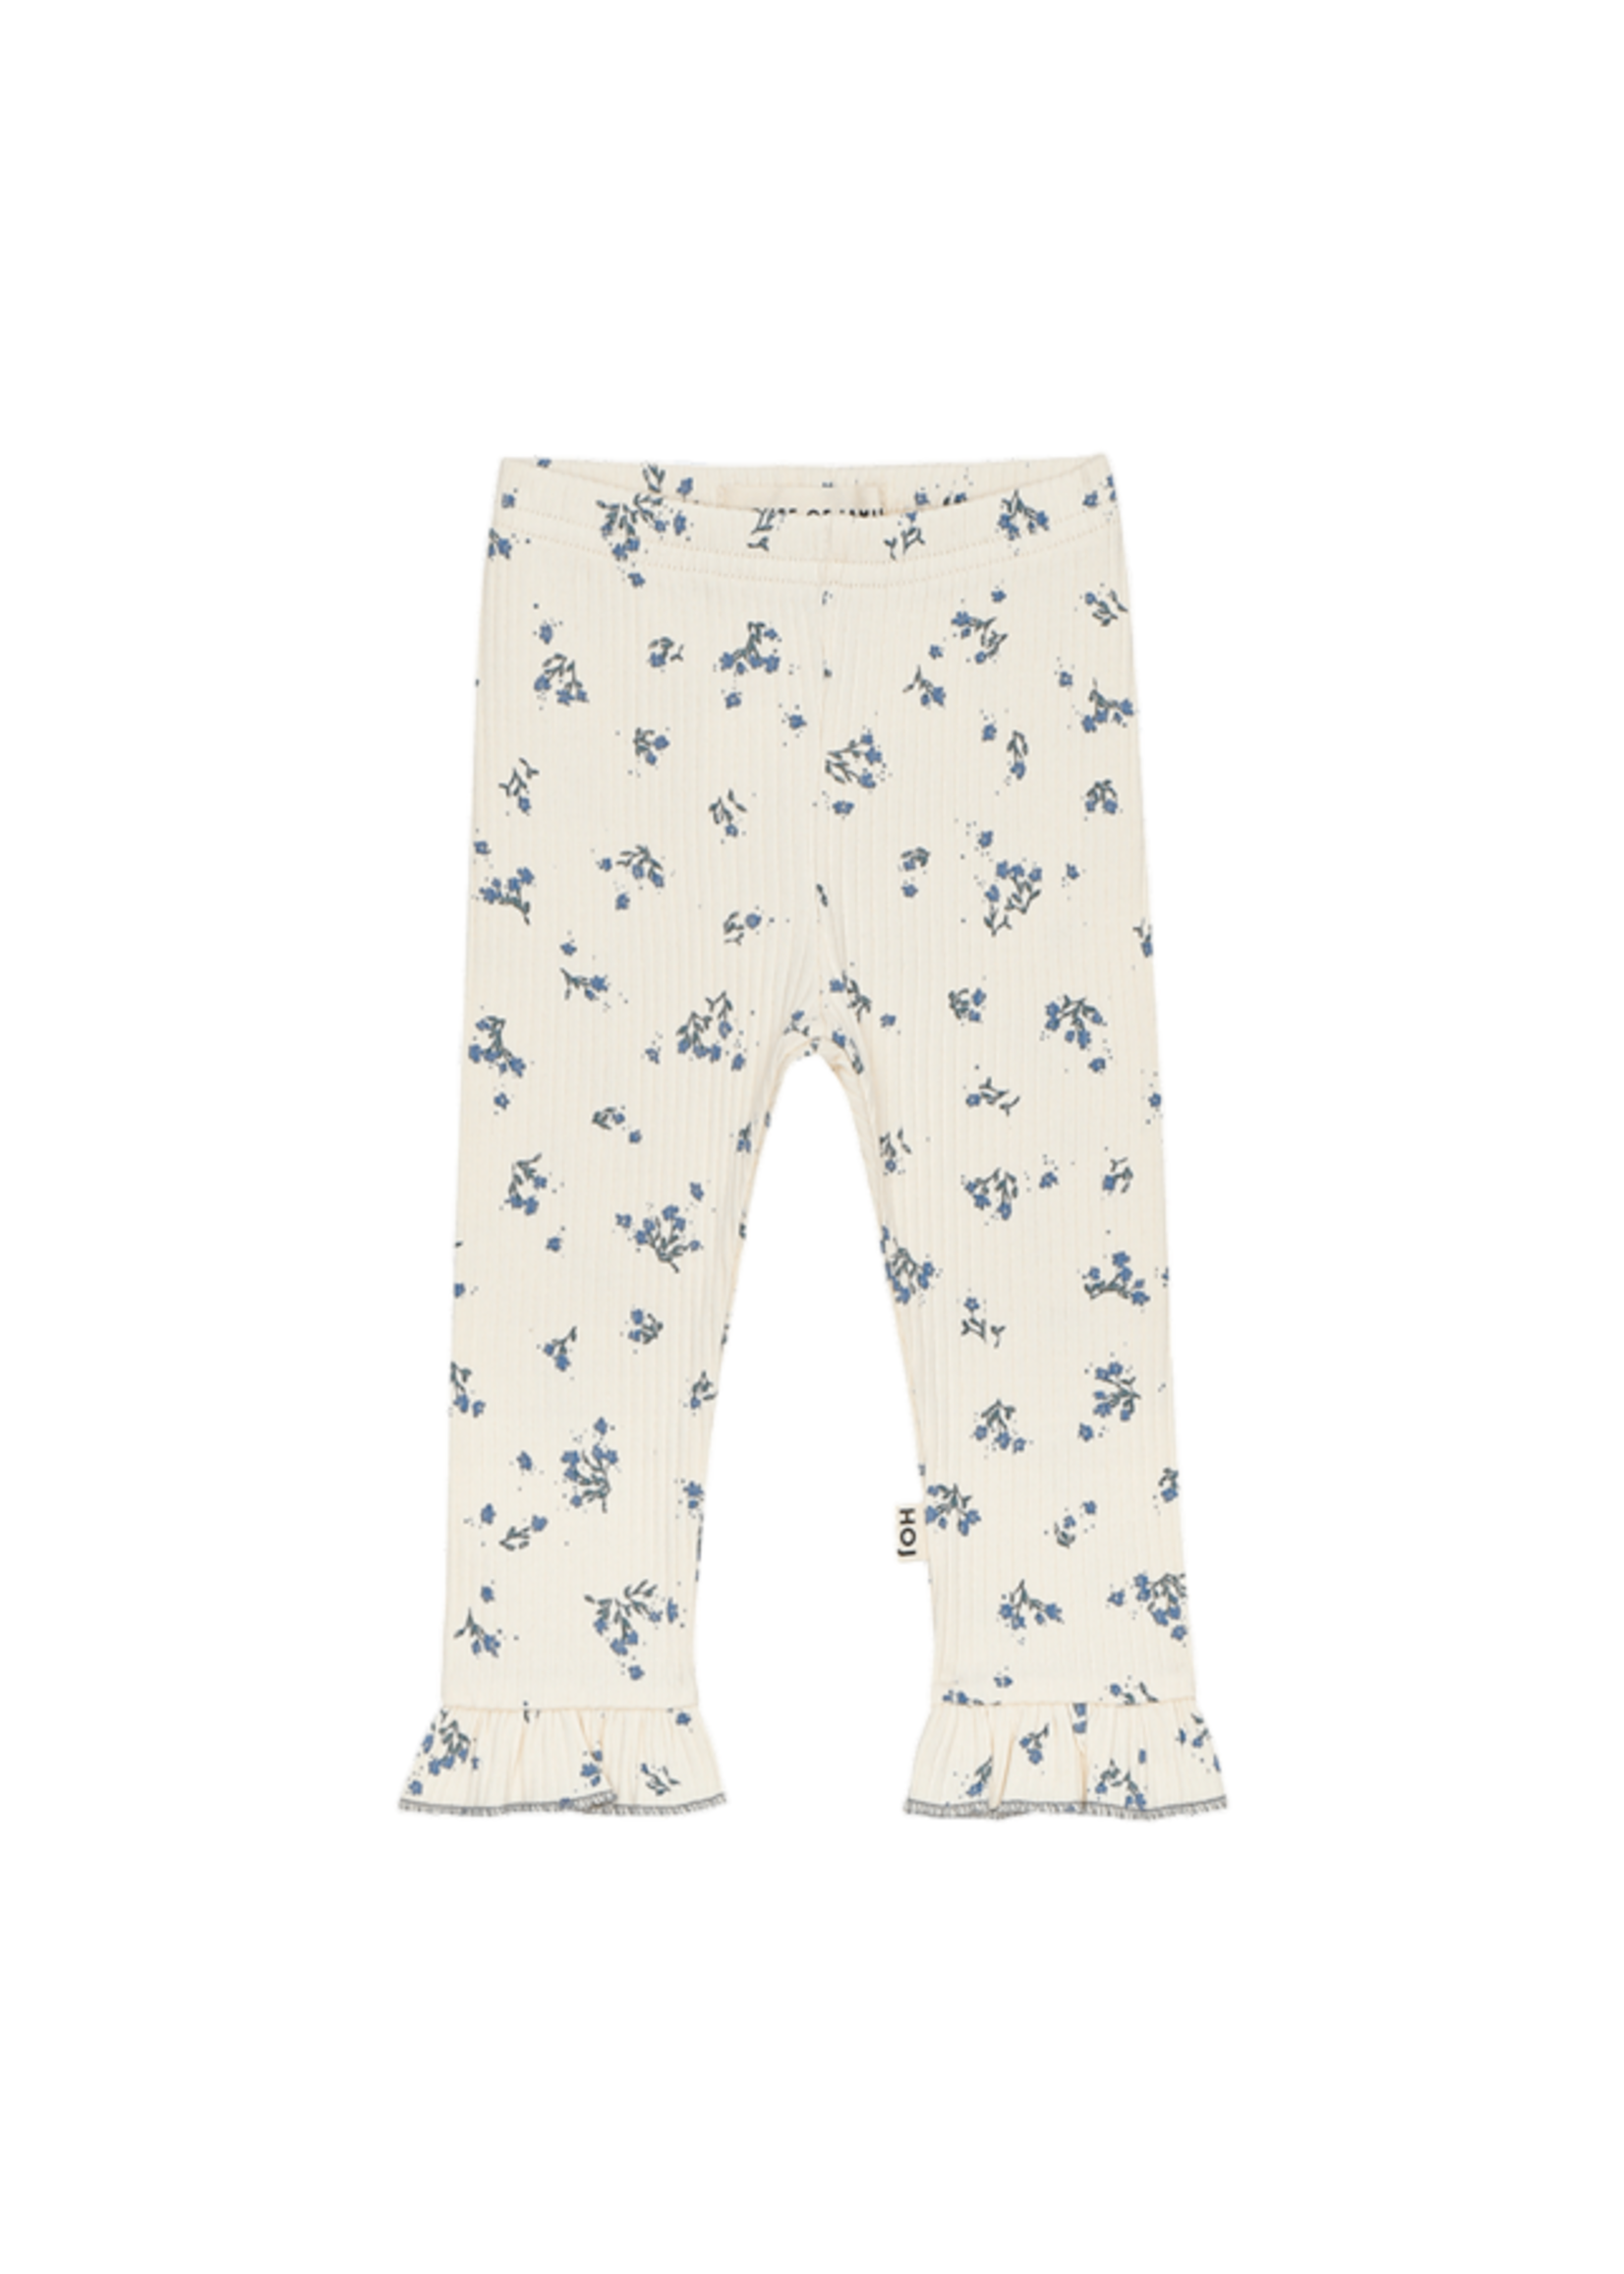 House of jamie Frill leggings stone blue floral - House of Jamie